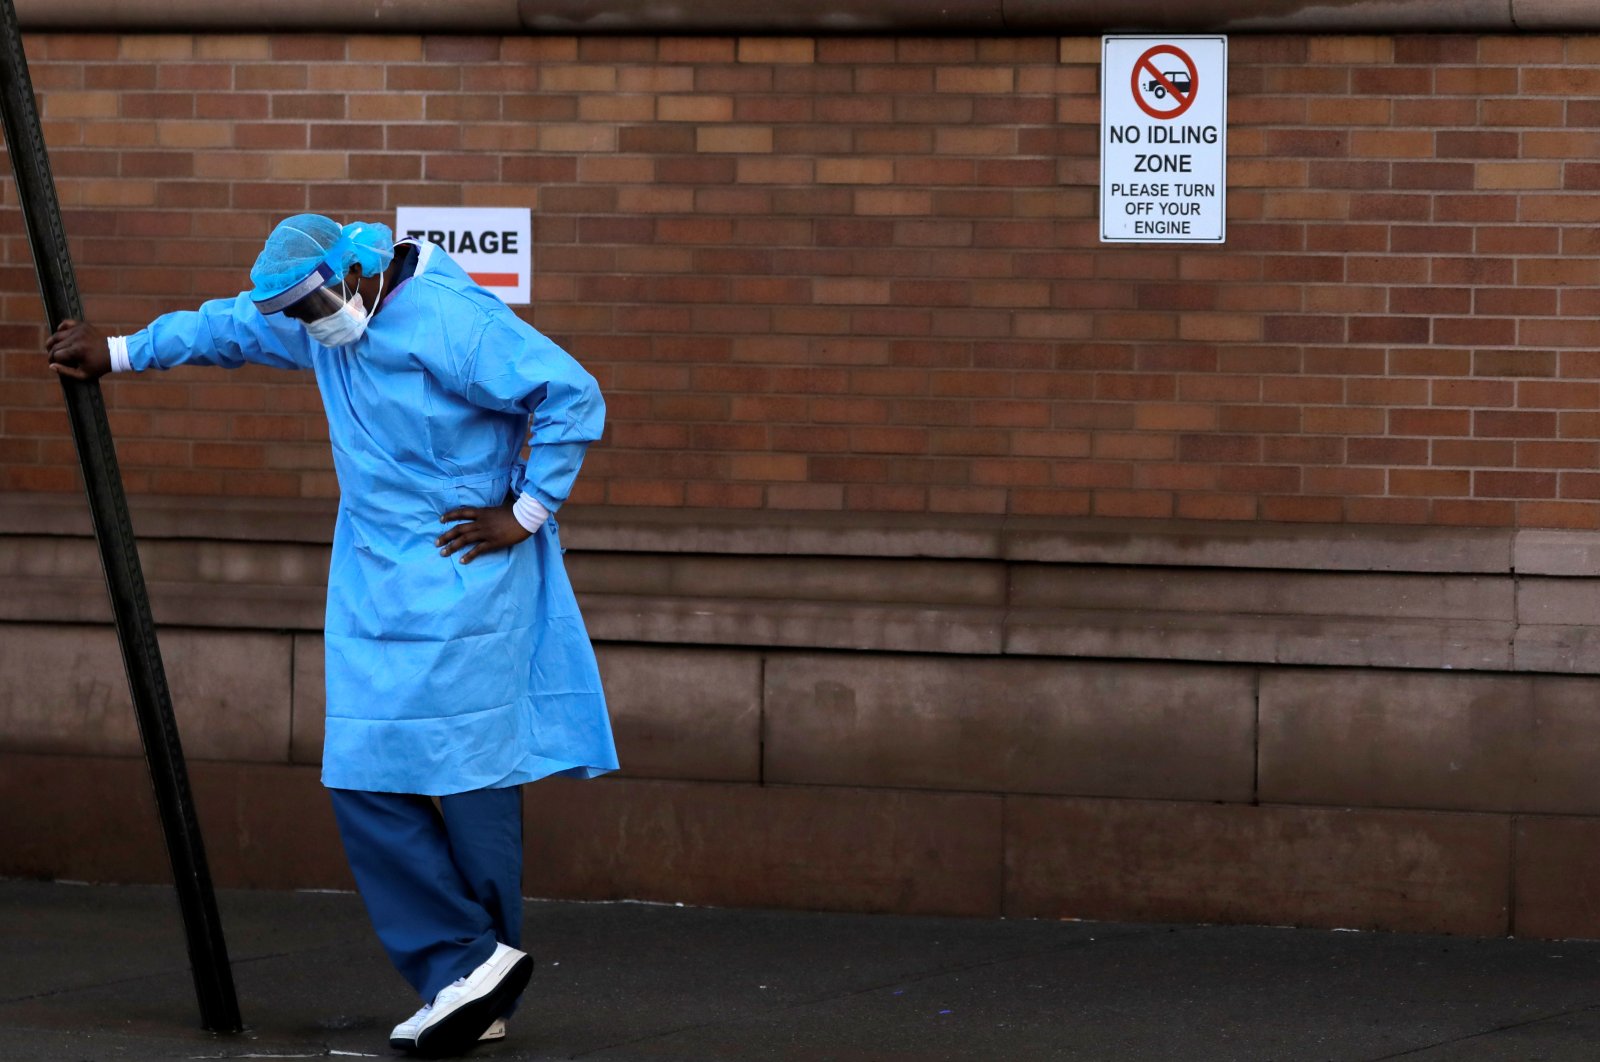 A healthcare worker takes a break outside the emergency center at Maimonides Medical Center during the outbreak of COVID-19 in the Brooklyn borough of New York, April 13, 2020. (Reuters Photo)